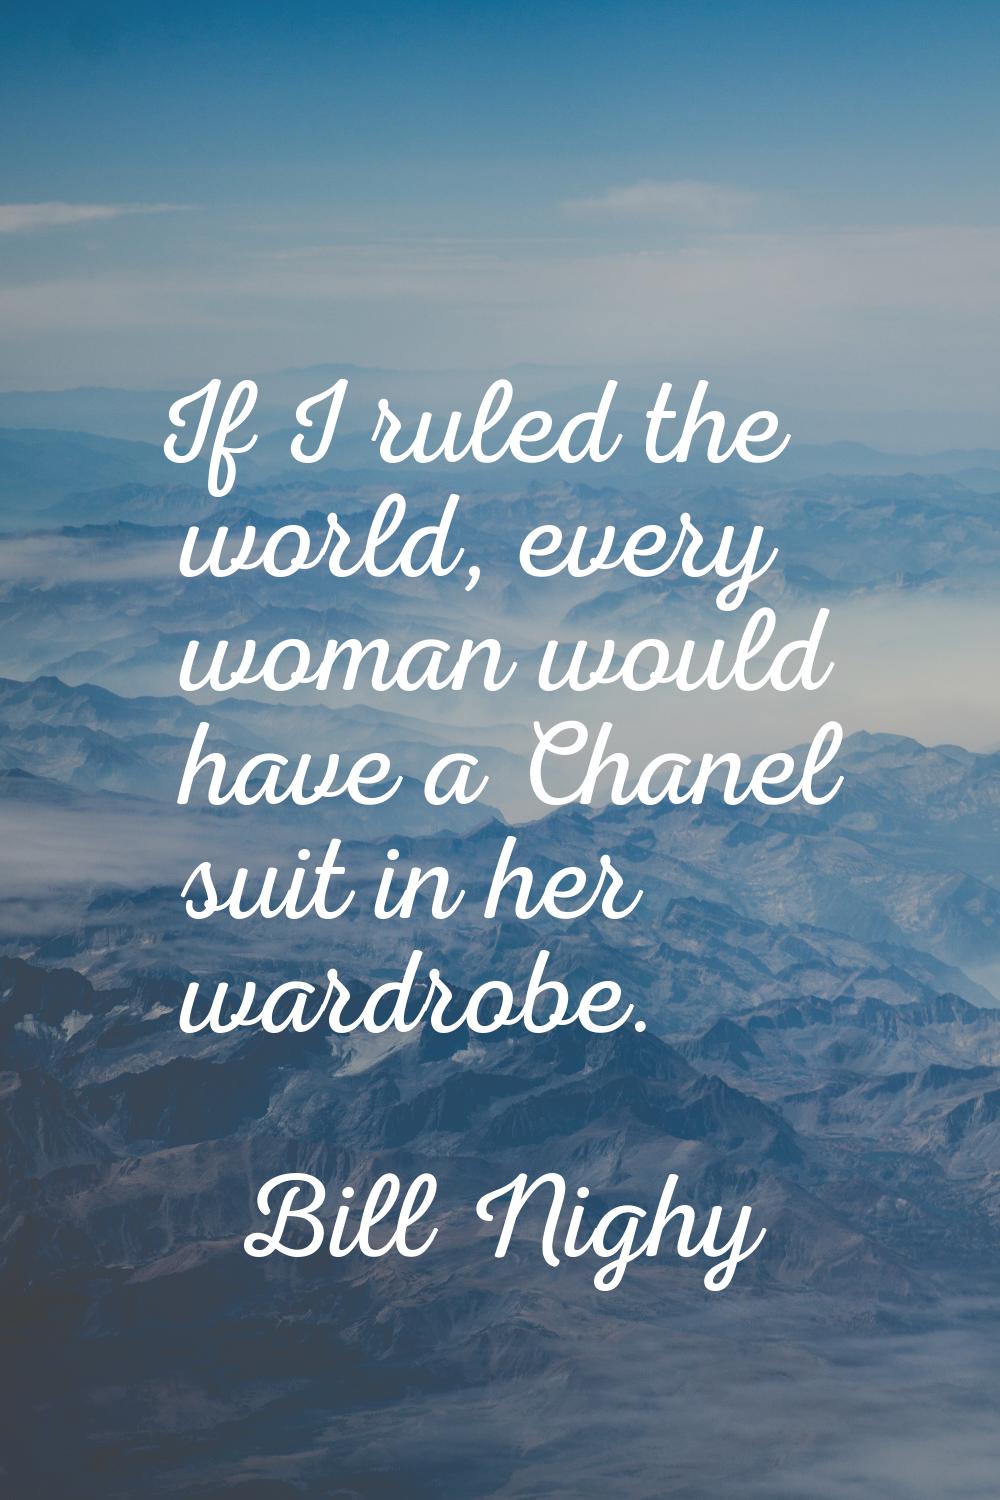 If I ruled the world, every woman would have a Chanel suit in her wardrobe.